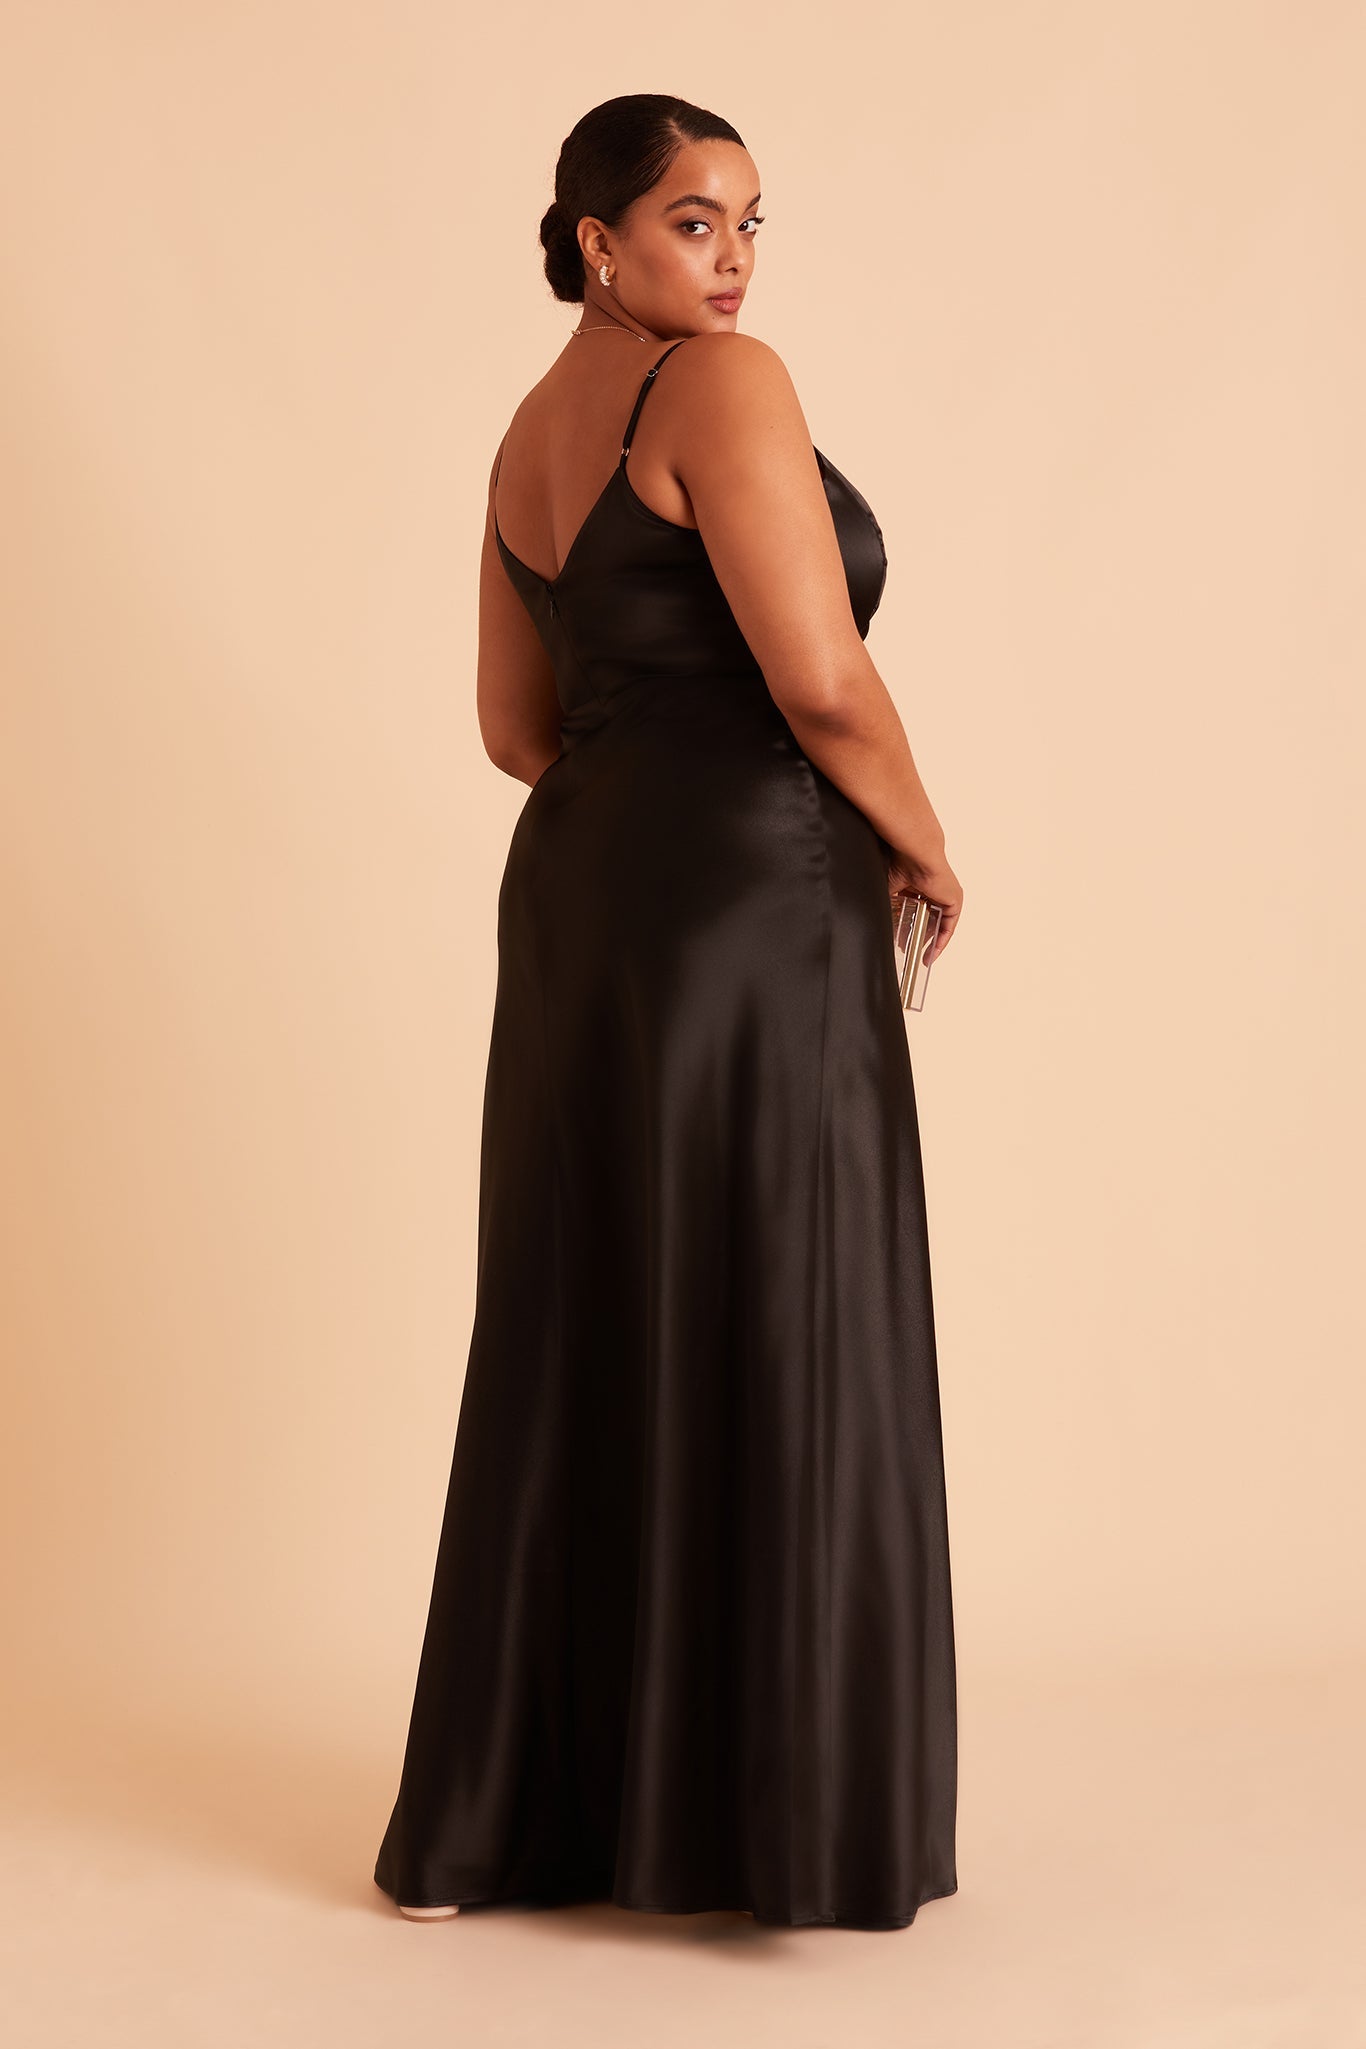 Jay plus size bridesmaid dress with slit in black satin by Birdy Grey, side view